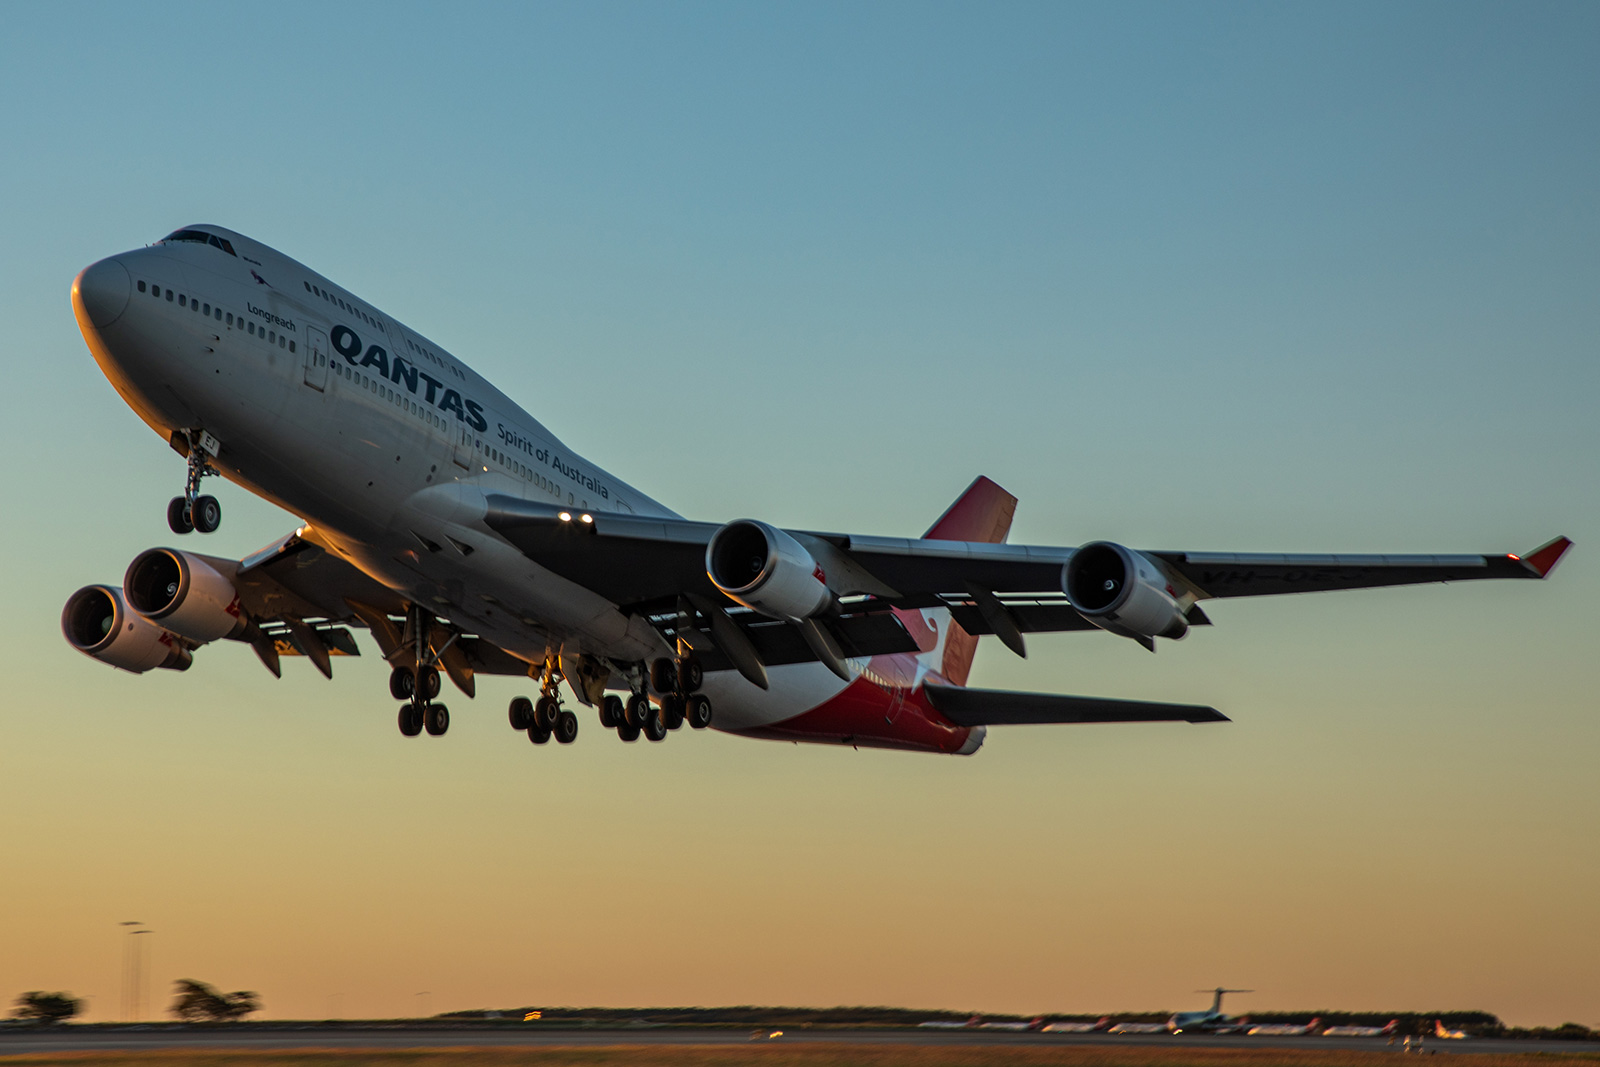 There is an enormous amount of nostalgia and affection for the 747